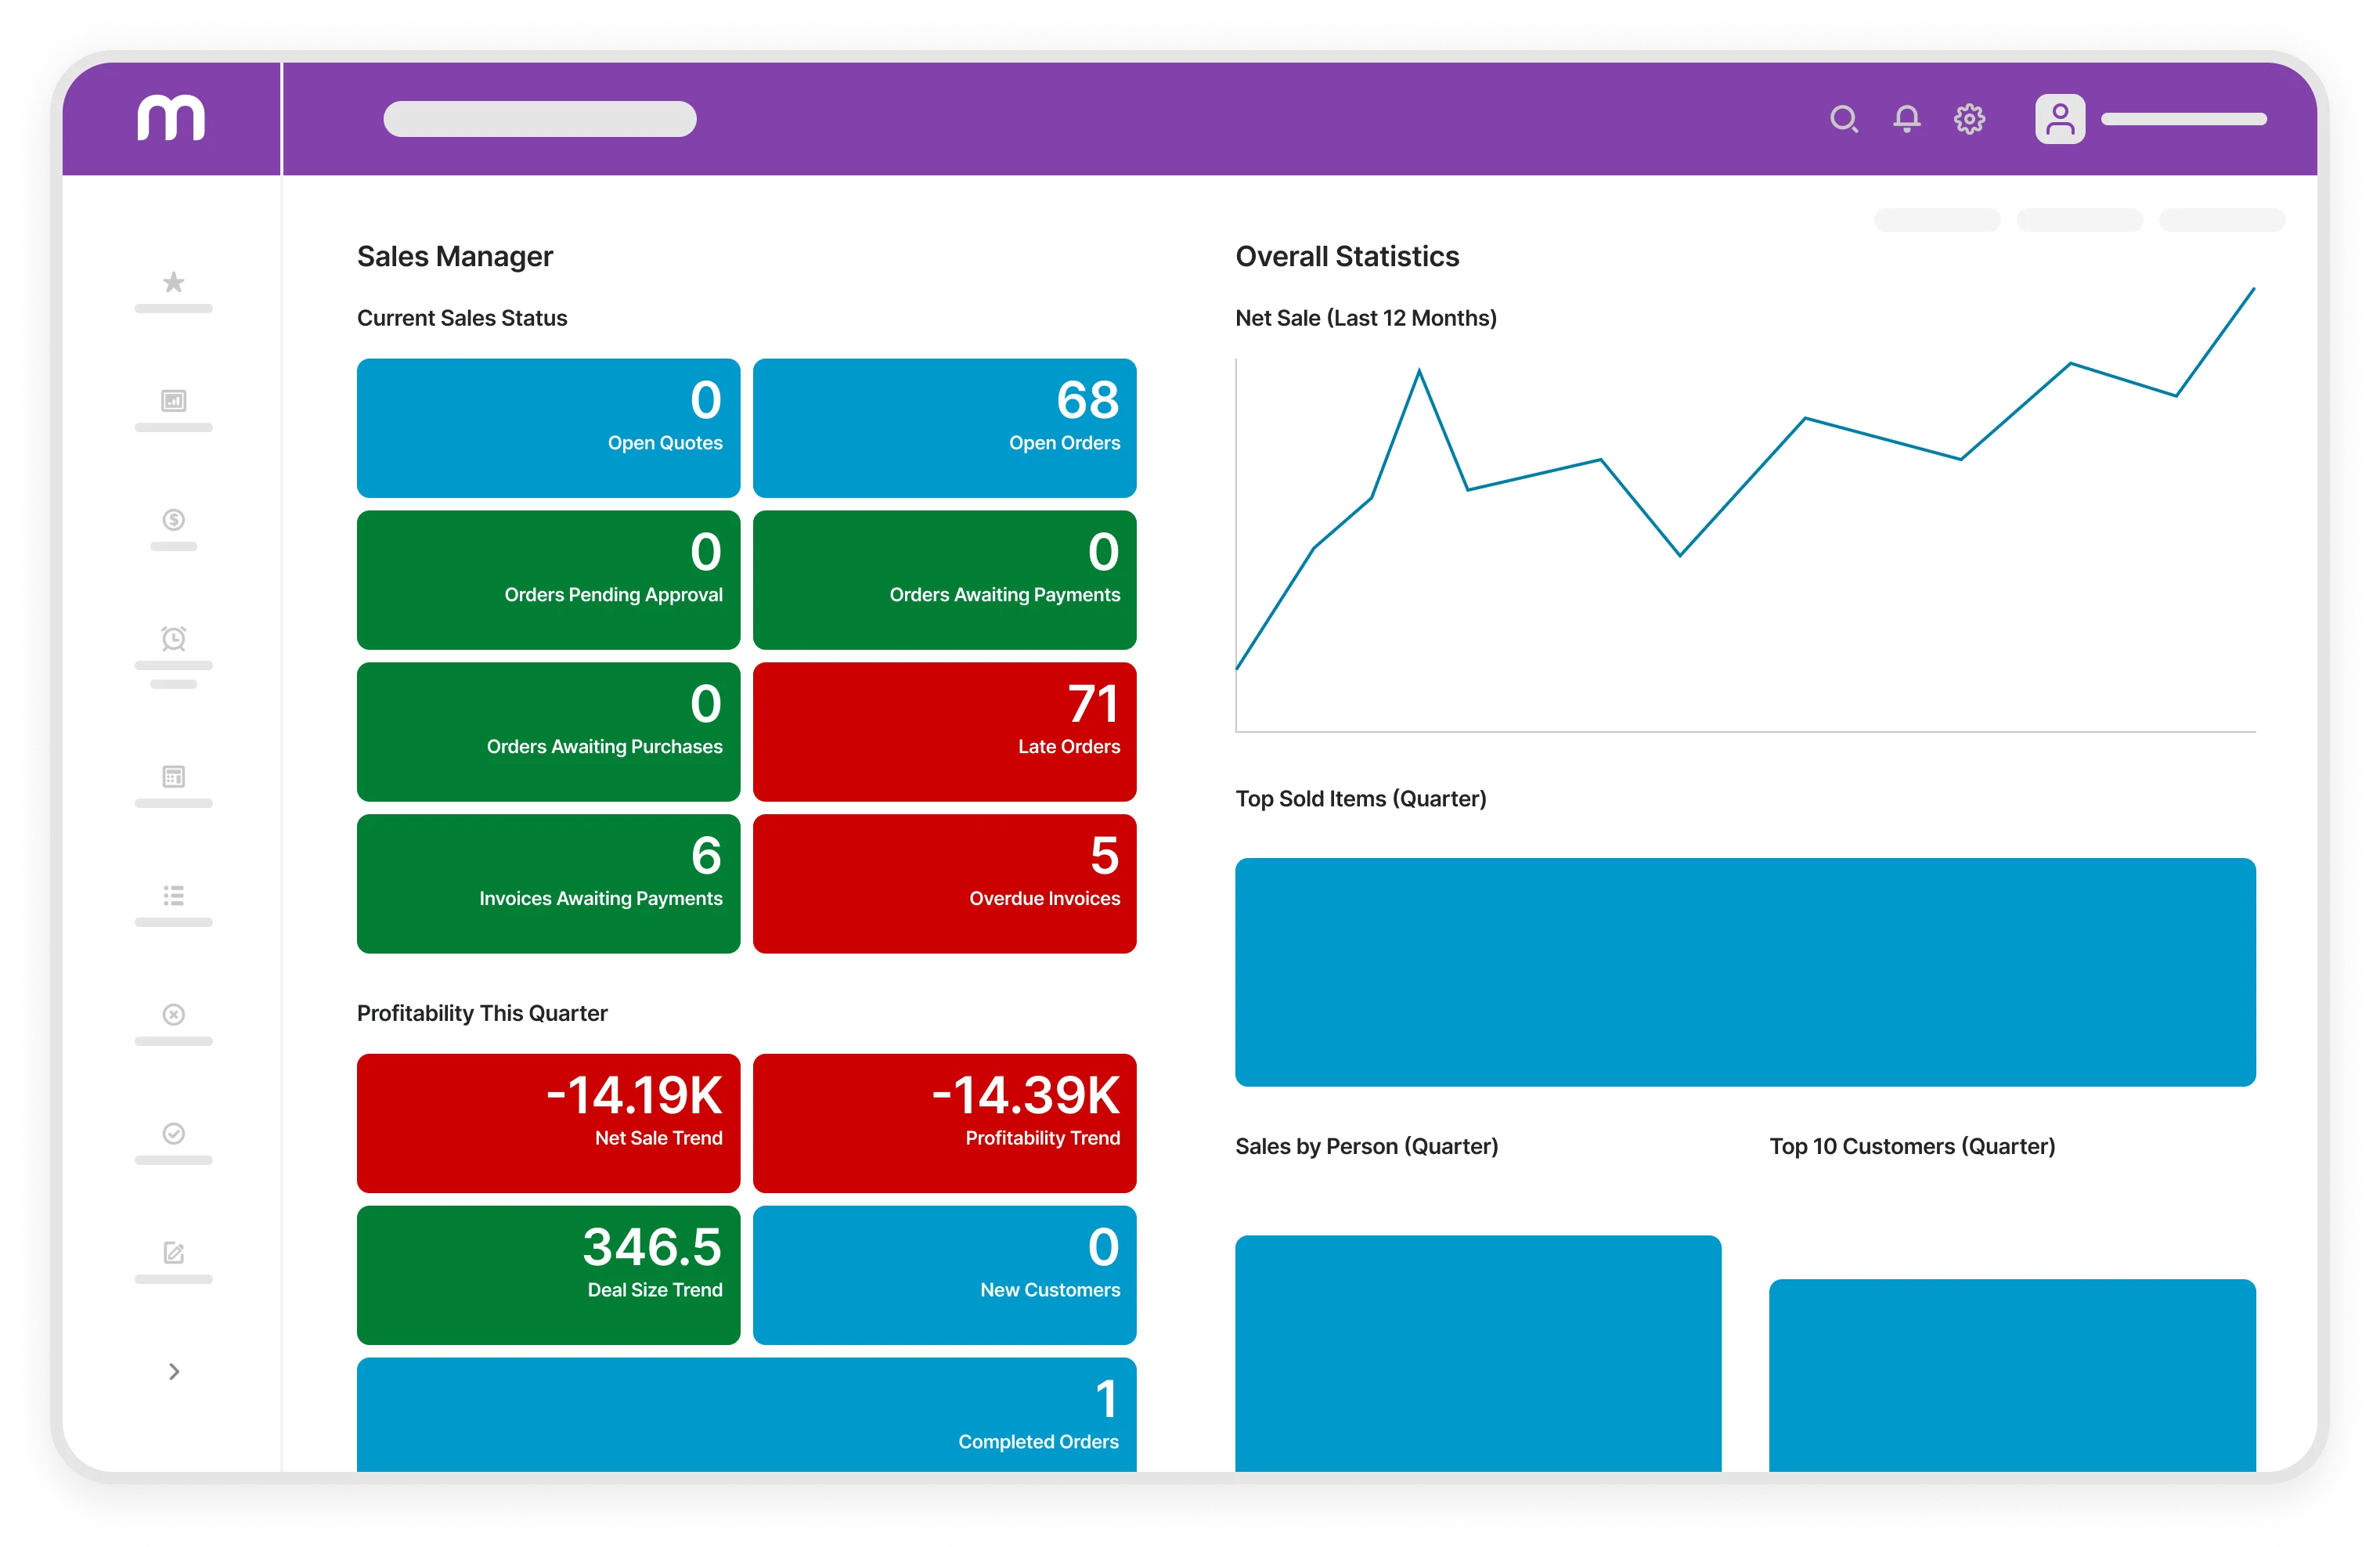 The sales manager dashboard shows the status of current sales and orders, net sales over time, and top sold items.